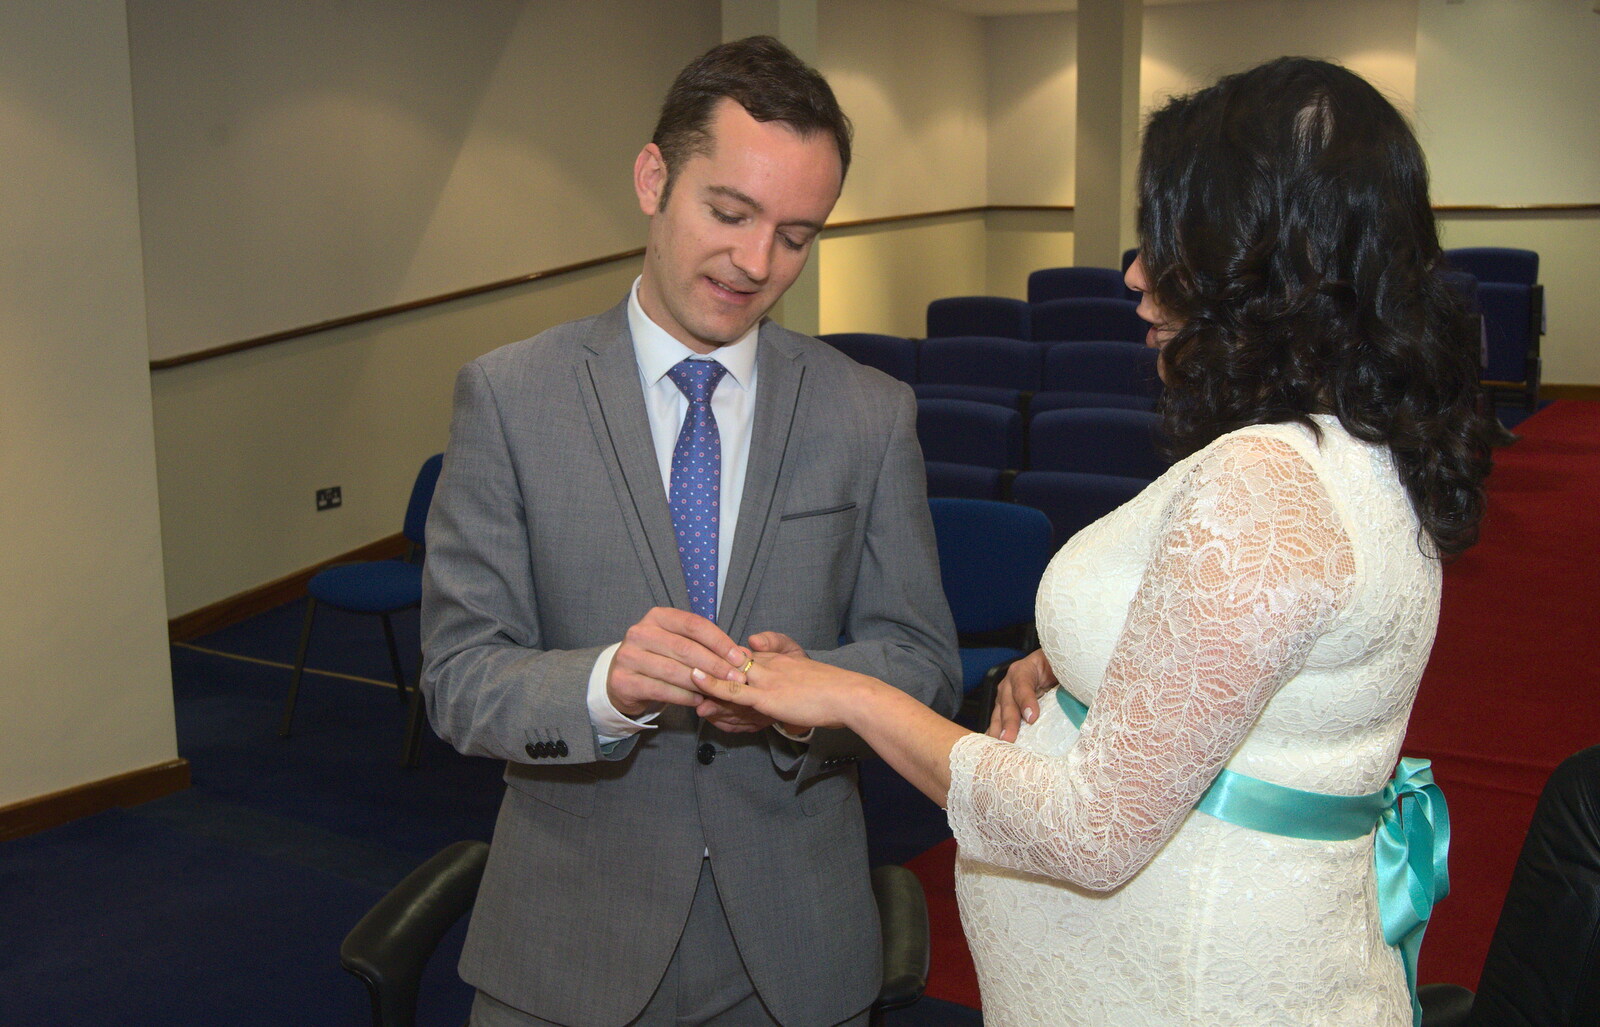 The ring is applied from James and Haryanna's Wedding, Grand Canal Dock, Dublin - 15th April 2015